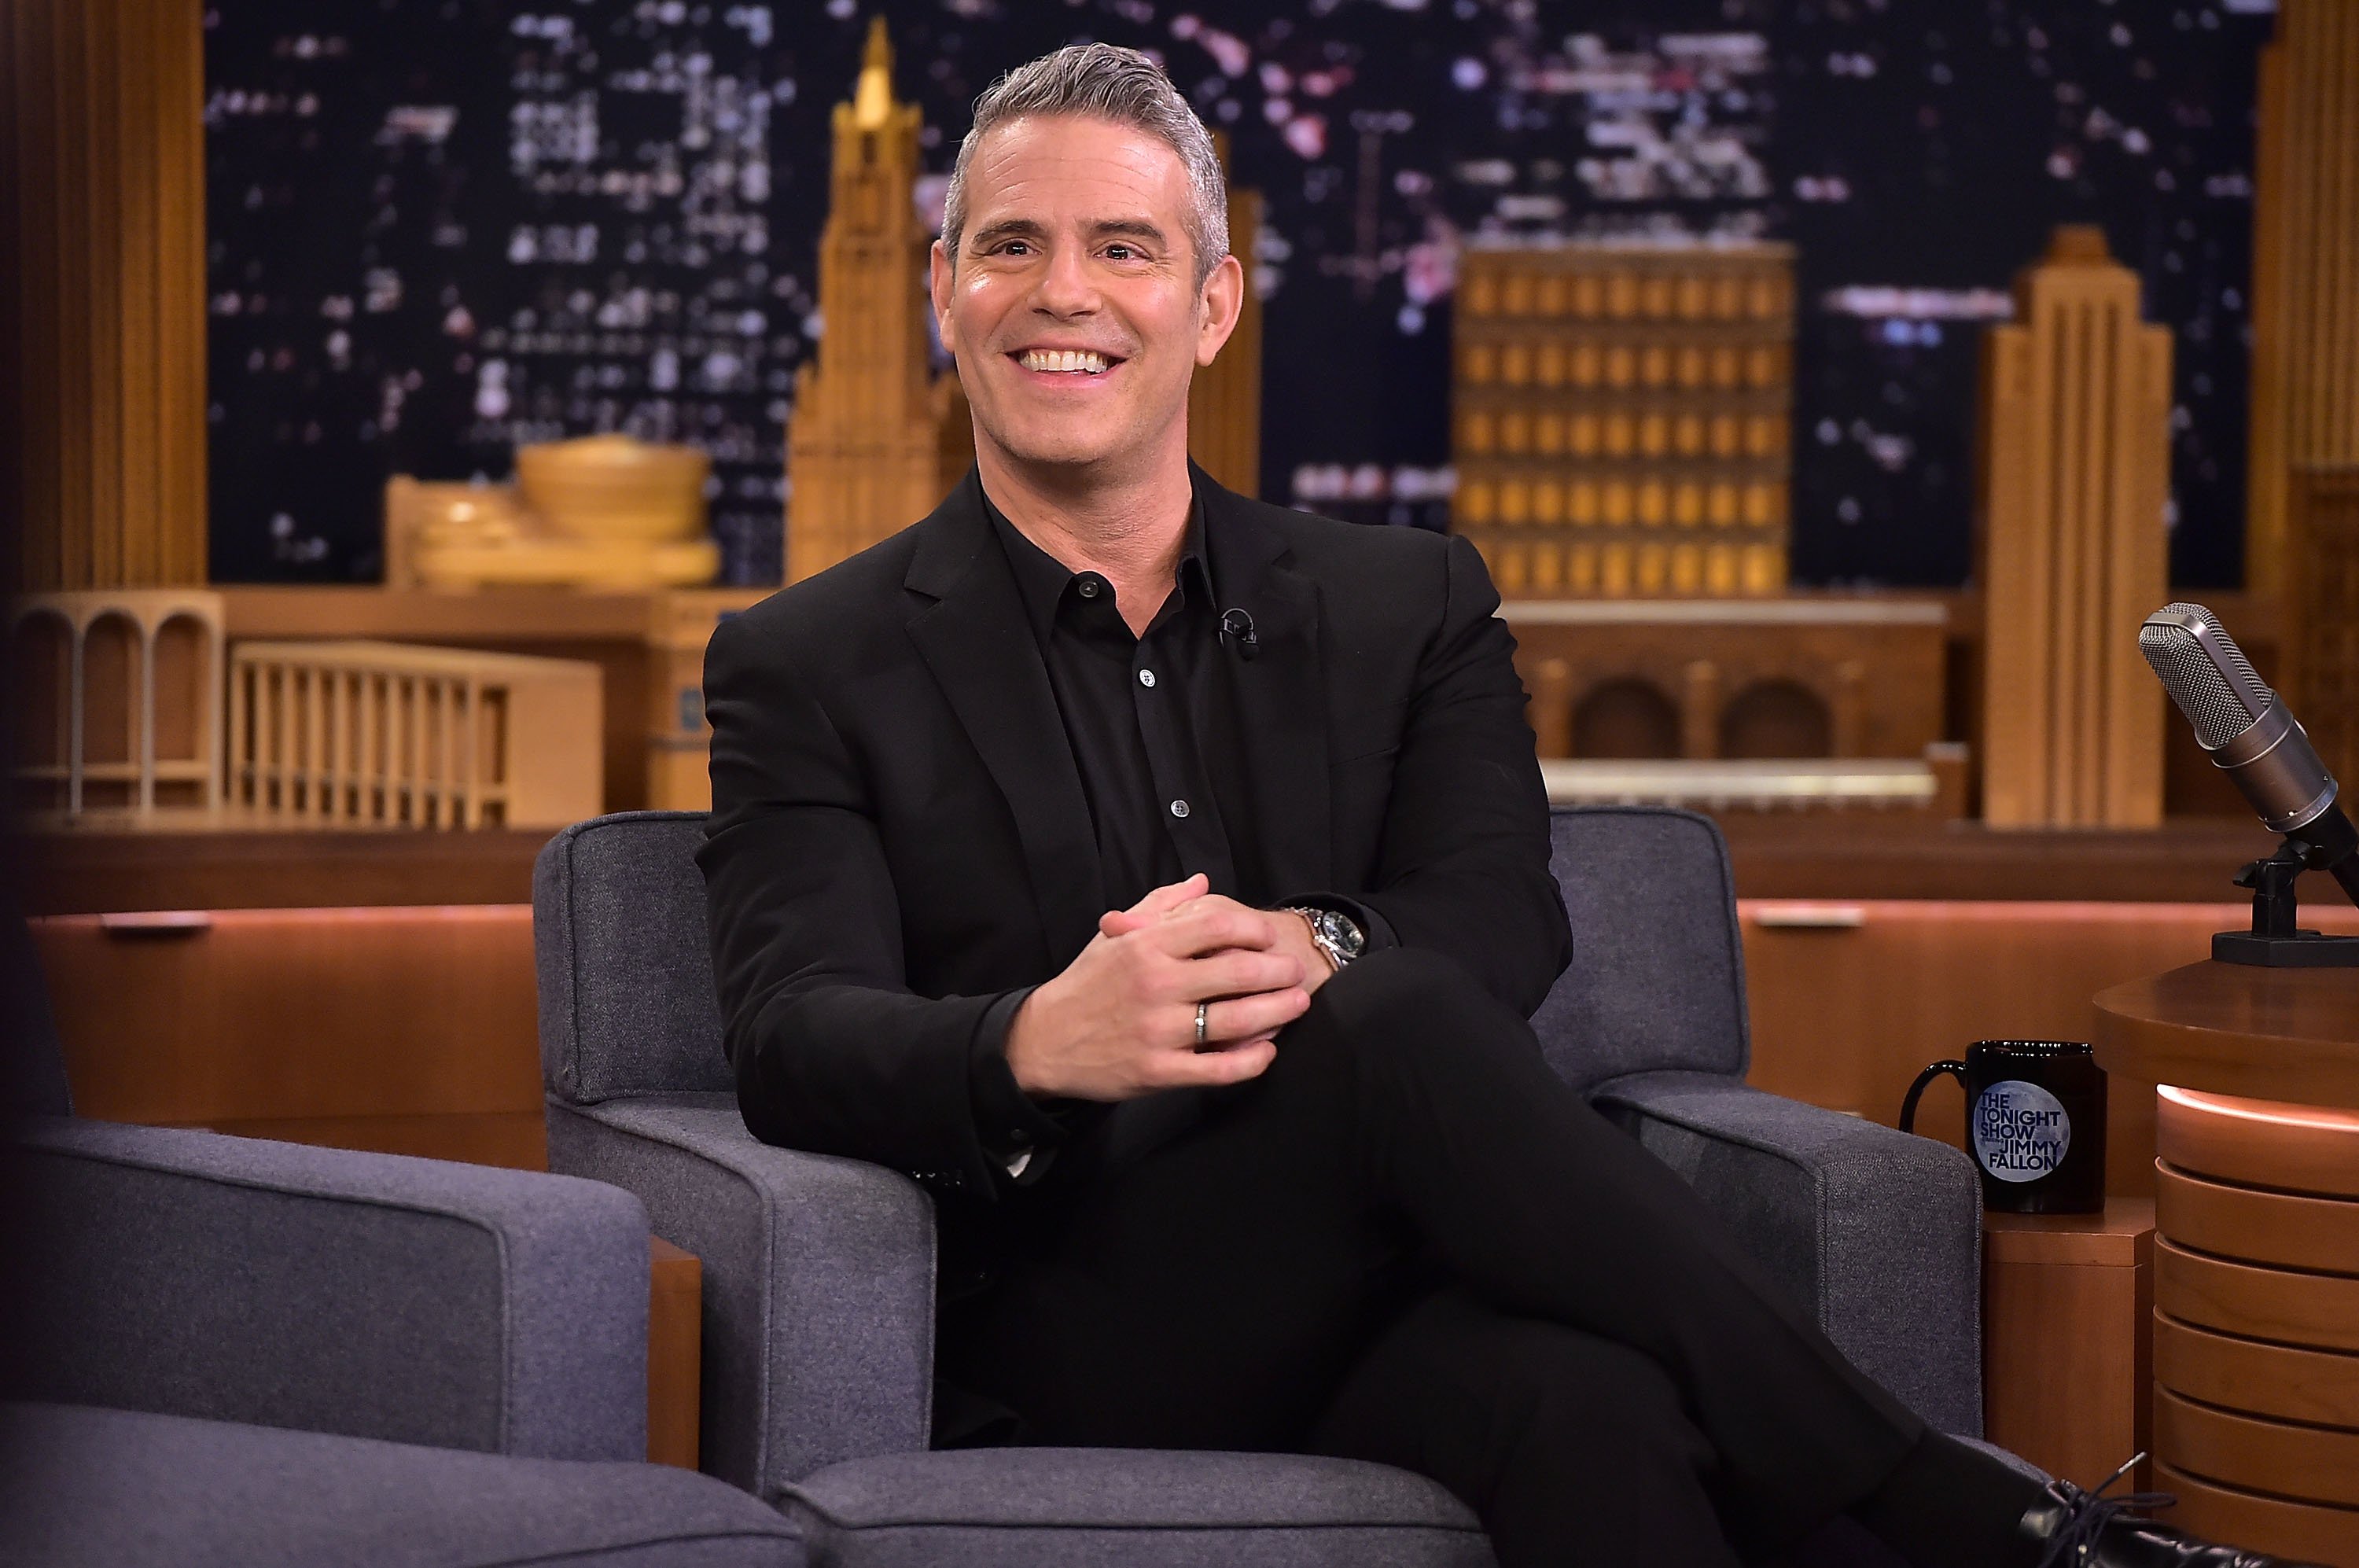 Andy Cohen besucht "The Tonight Show starring Jimmy Fallon" am 5. Dezember 2018 in New York City | Quelle: Getty Images